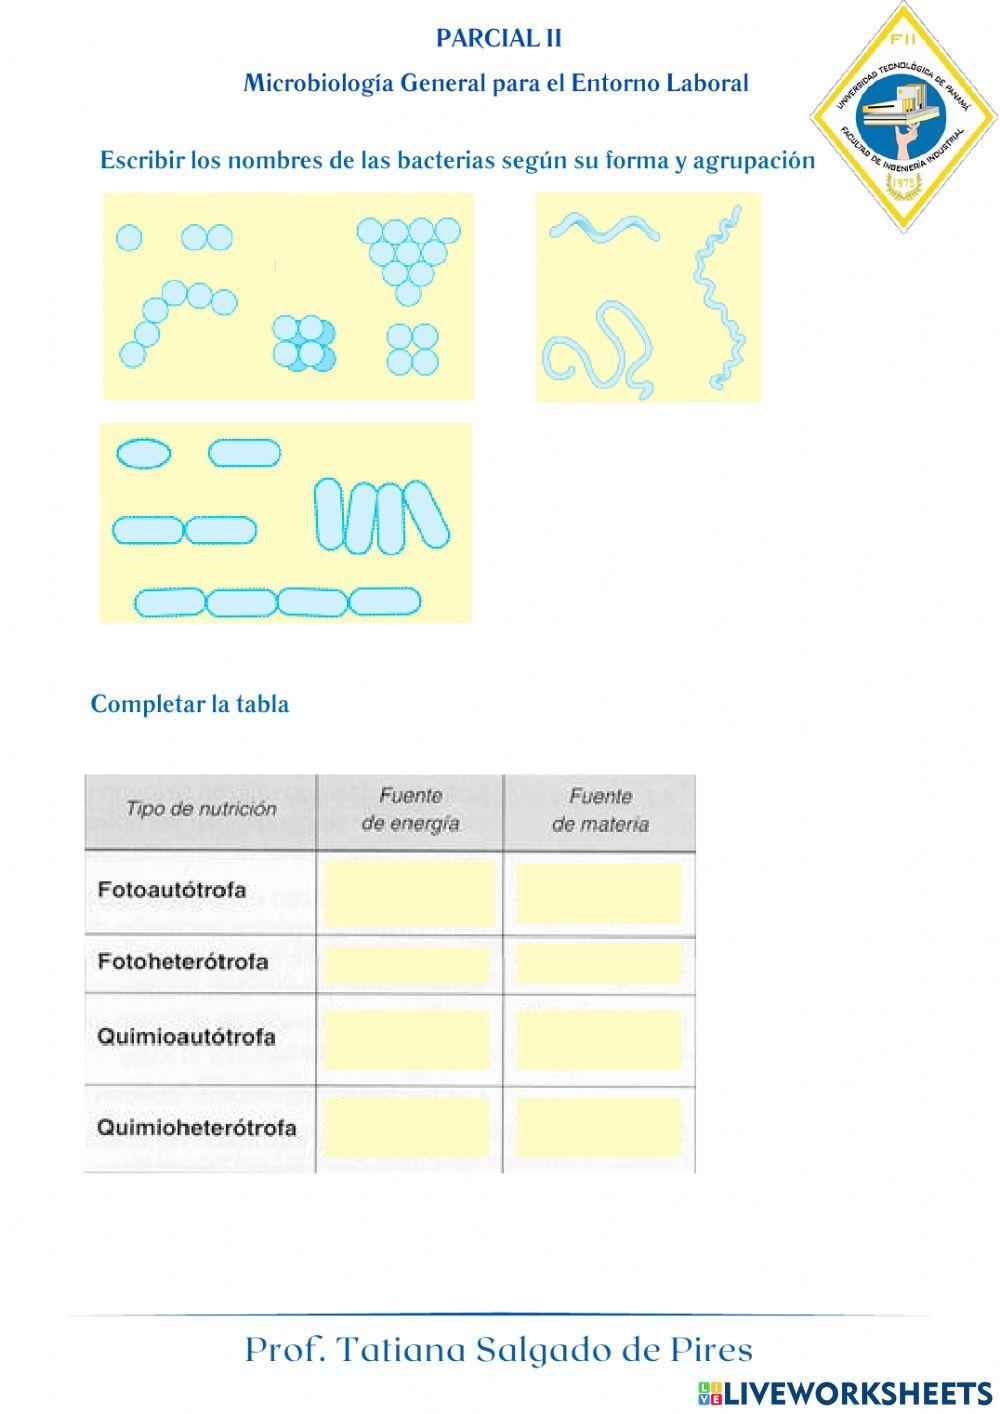 Parcial II microbiologia